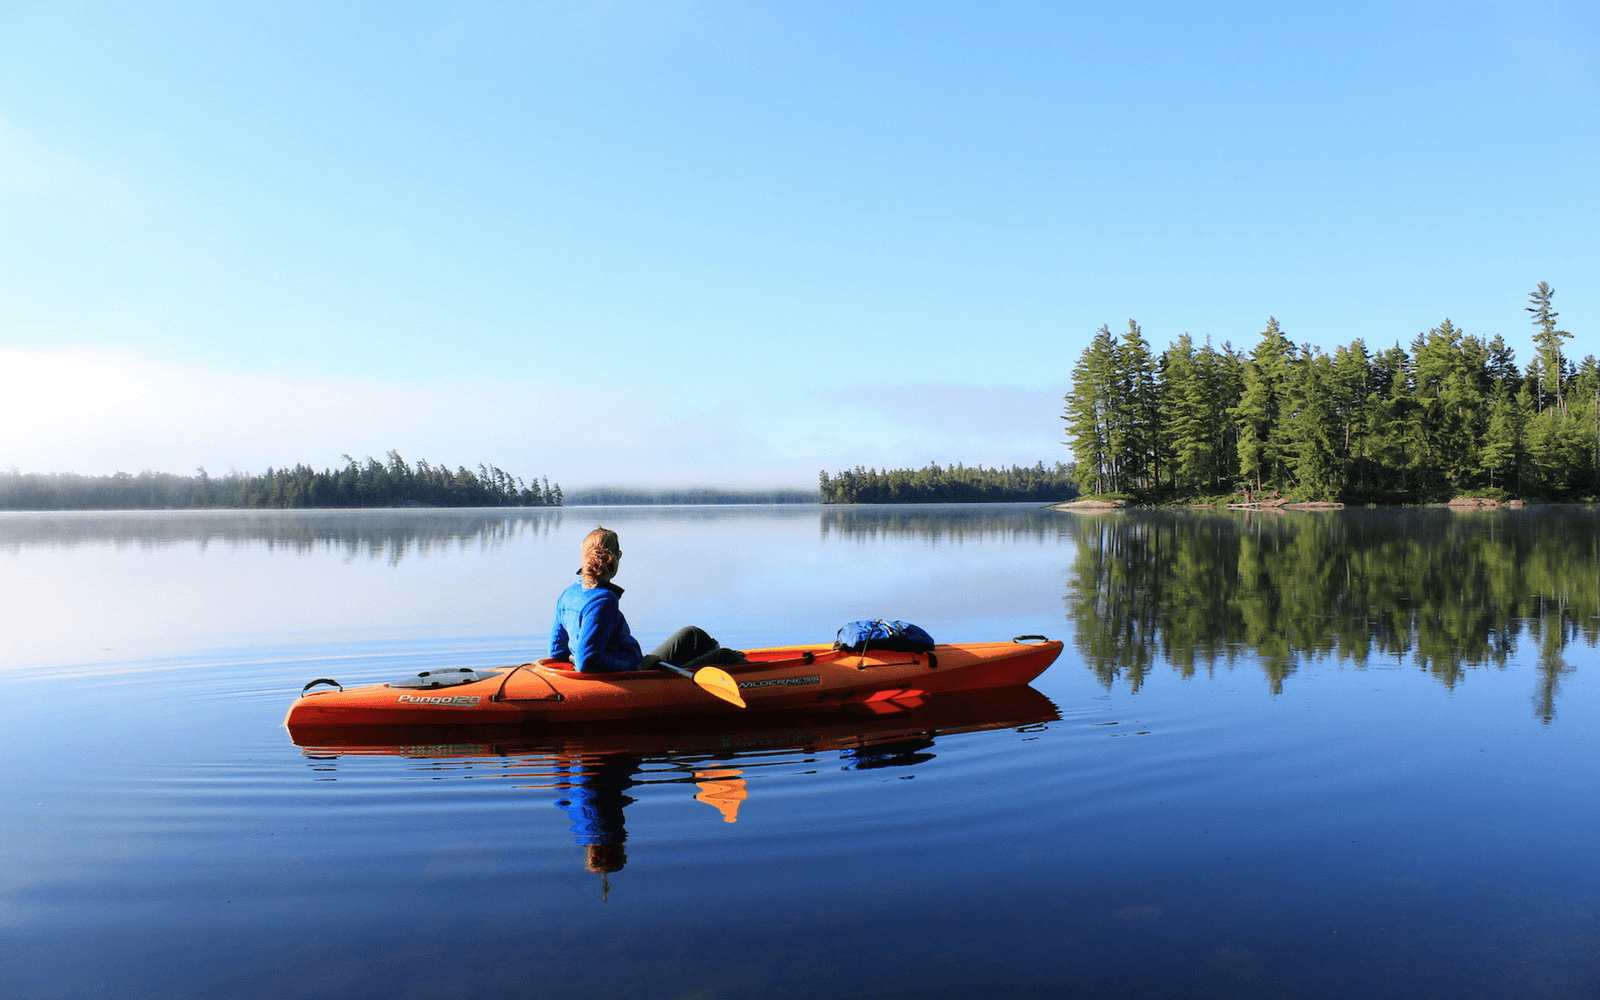 2014: Our Year in Review - Pure Adirondacks